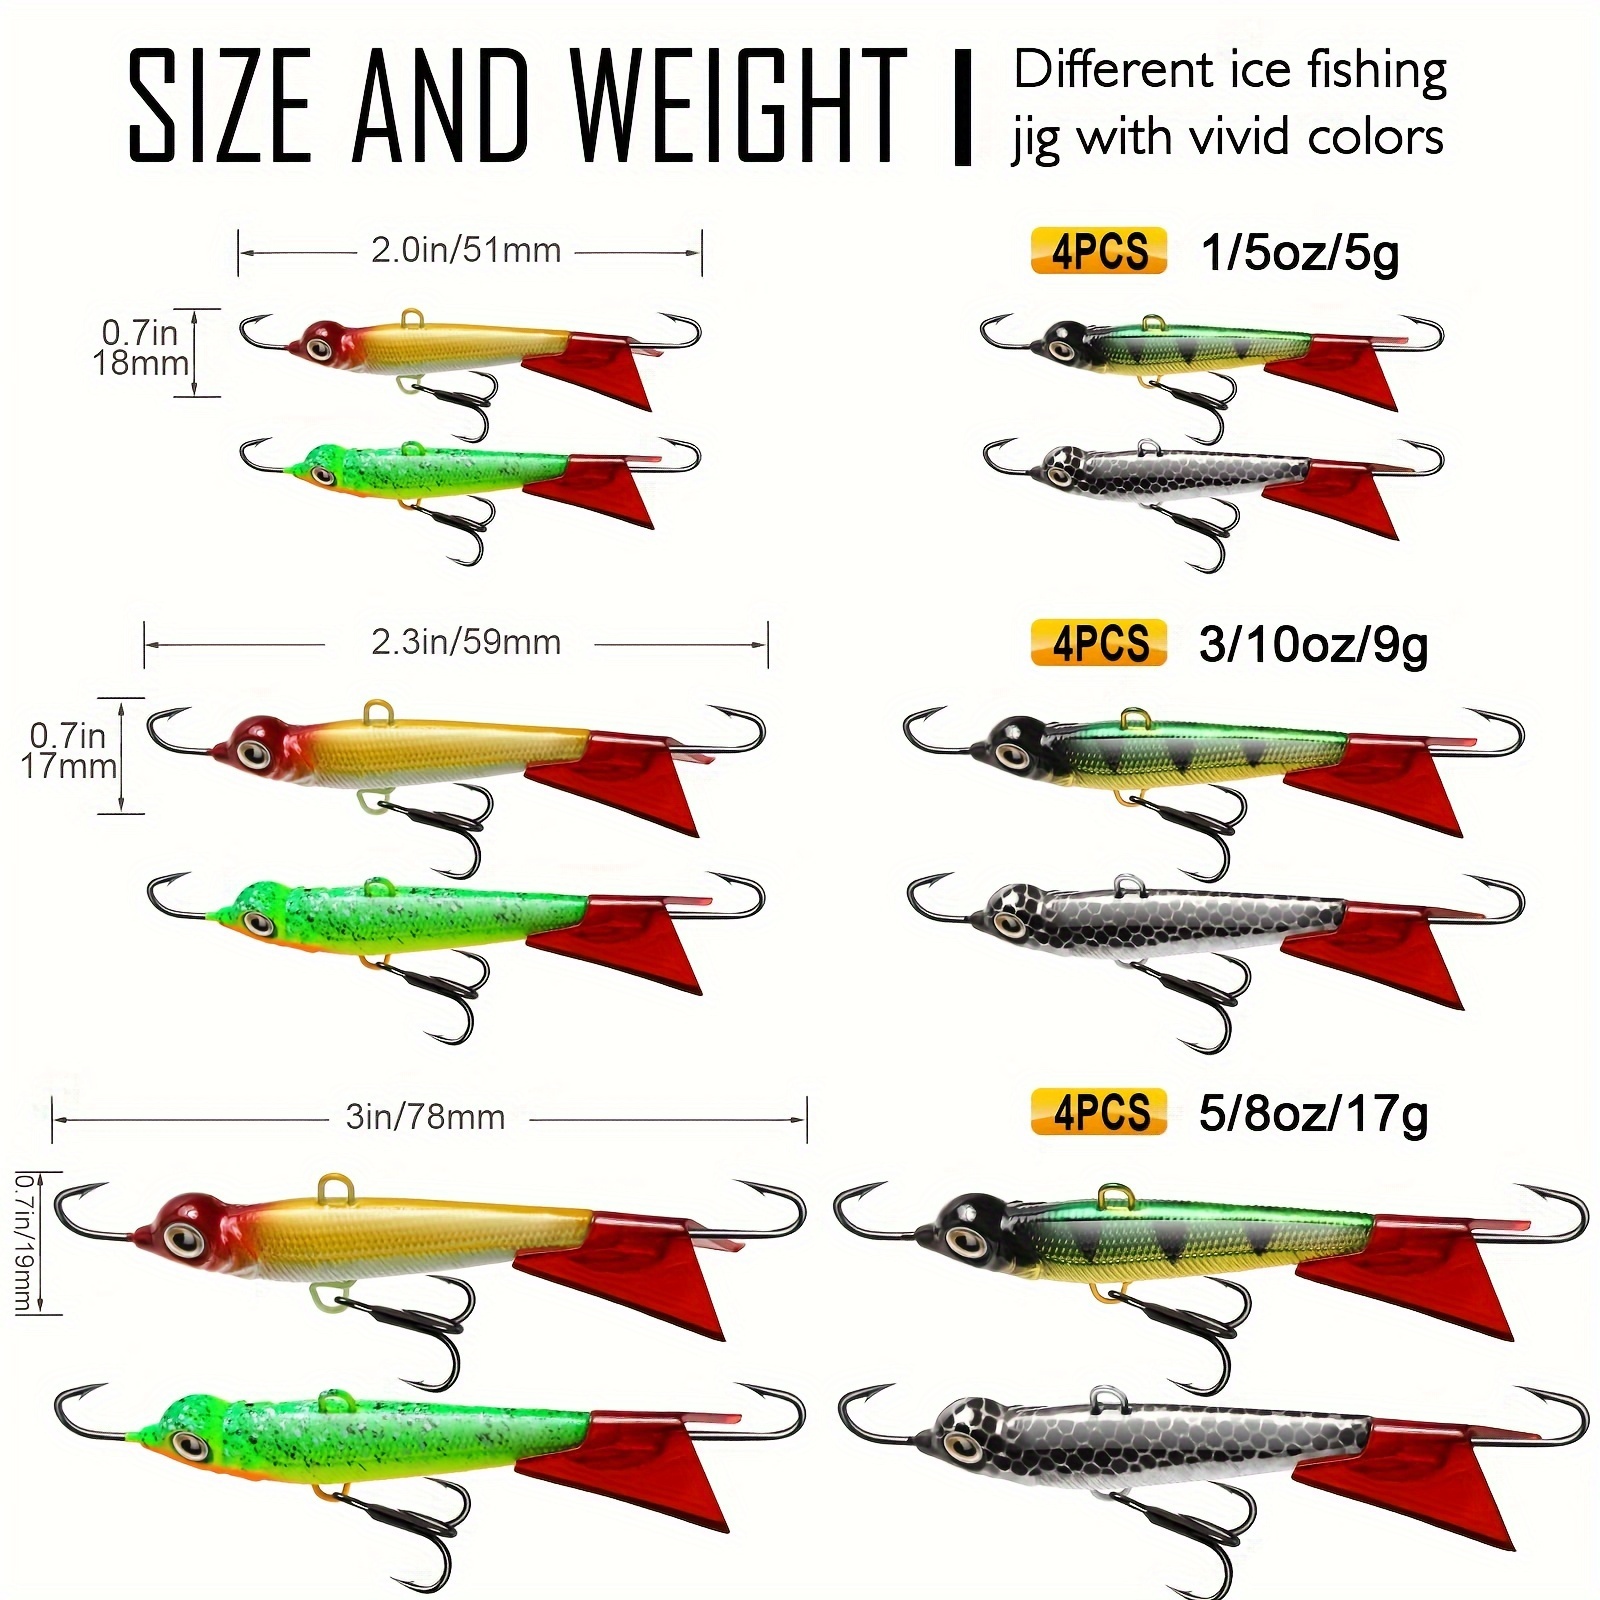 Ice Fishing Lures - 5 different